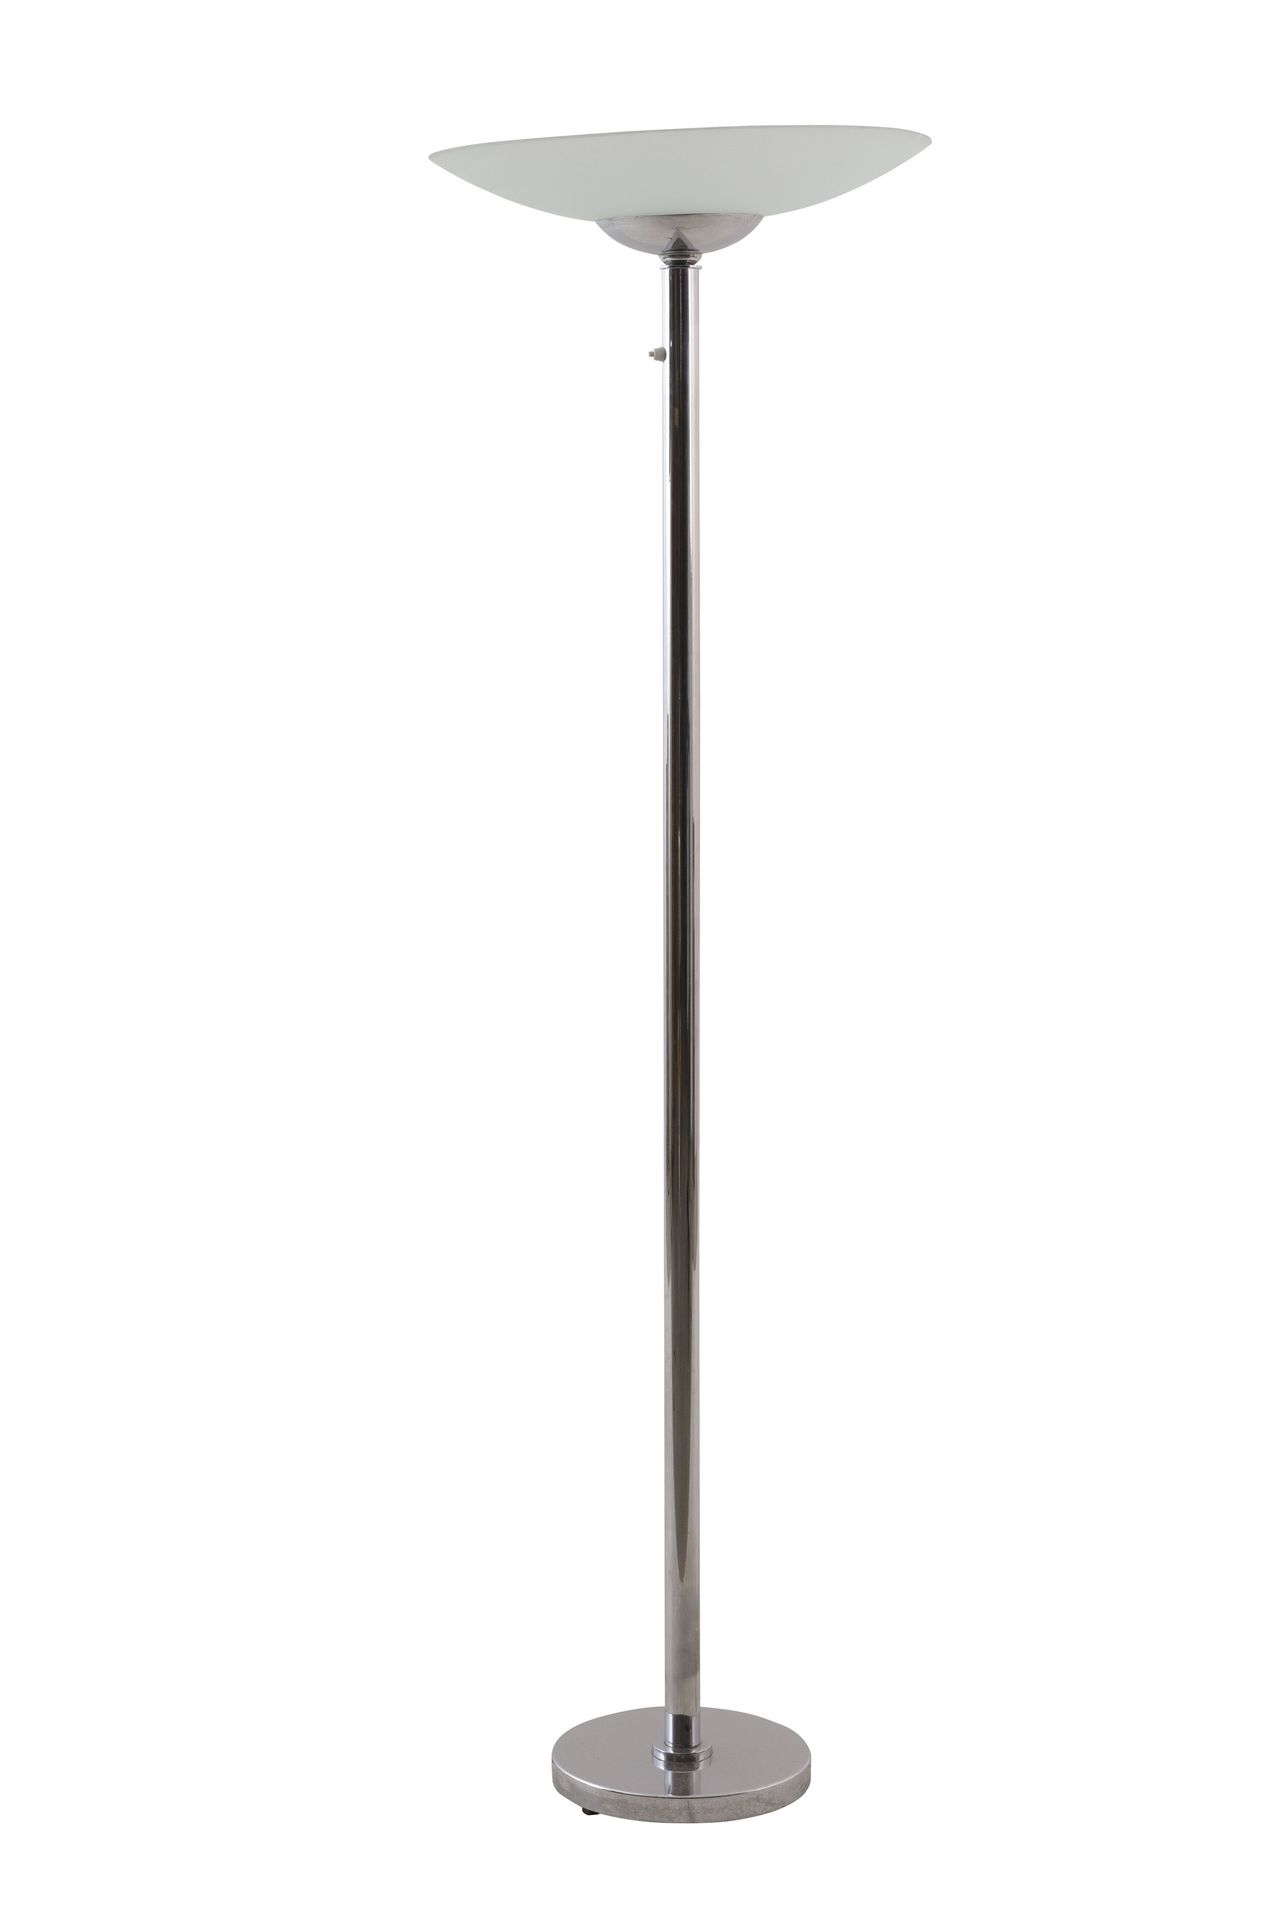 ANONIEM / ANONYME XX Floor lamp. 1990s. Chromed metal and satinised glass.

H.: &hellip;